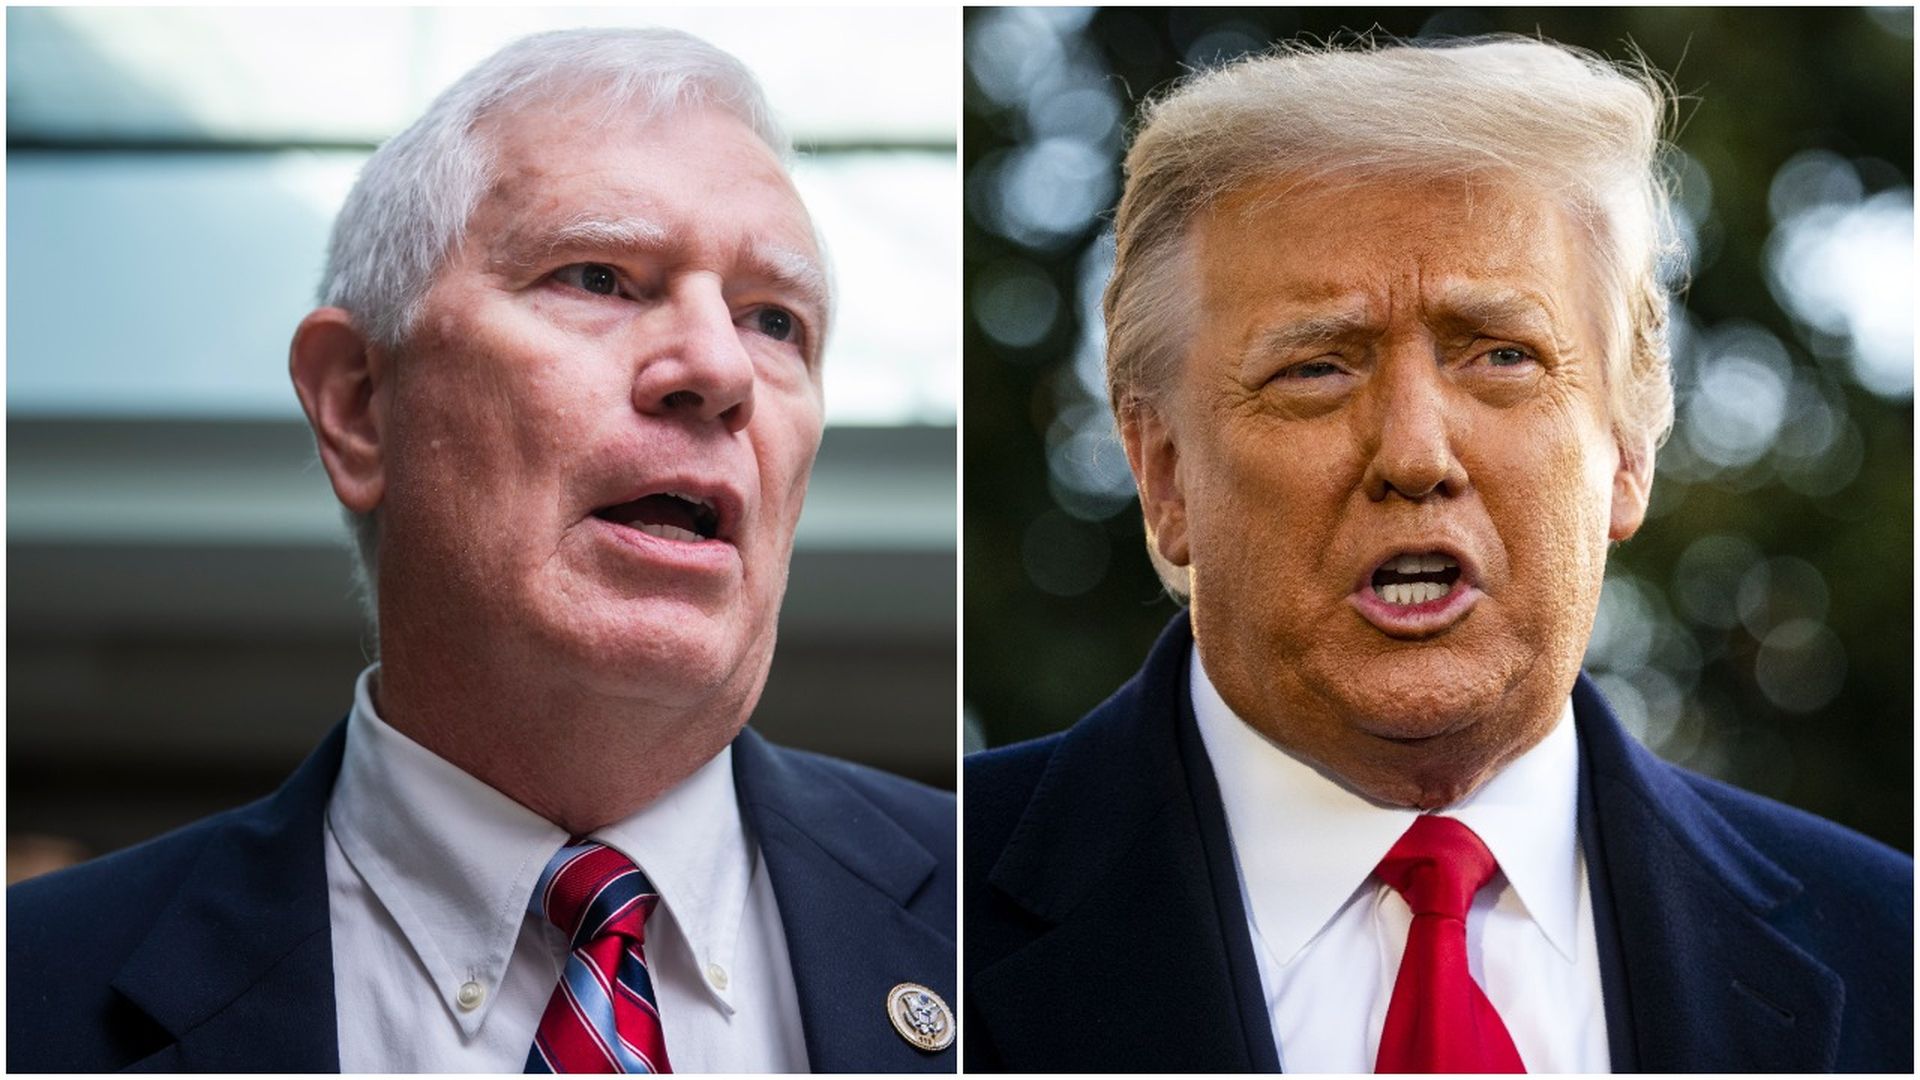 A combination image of Rep. Mo Brooks, R-Ala., and former President Trump